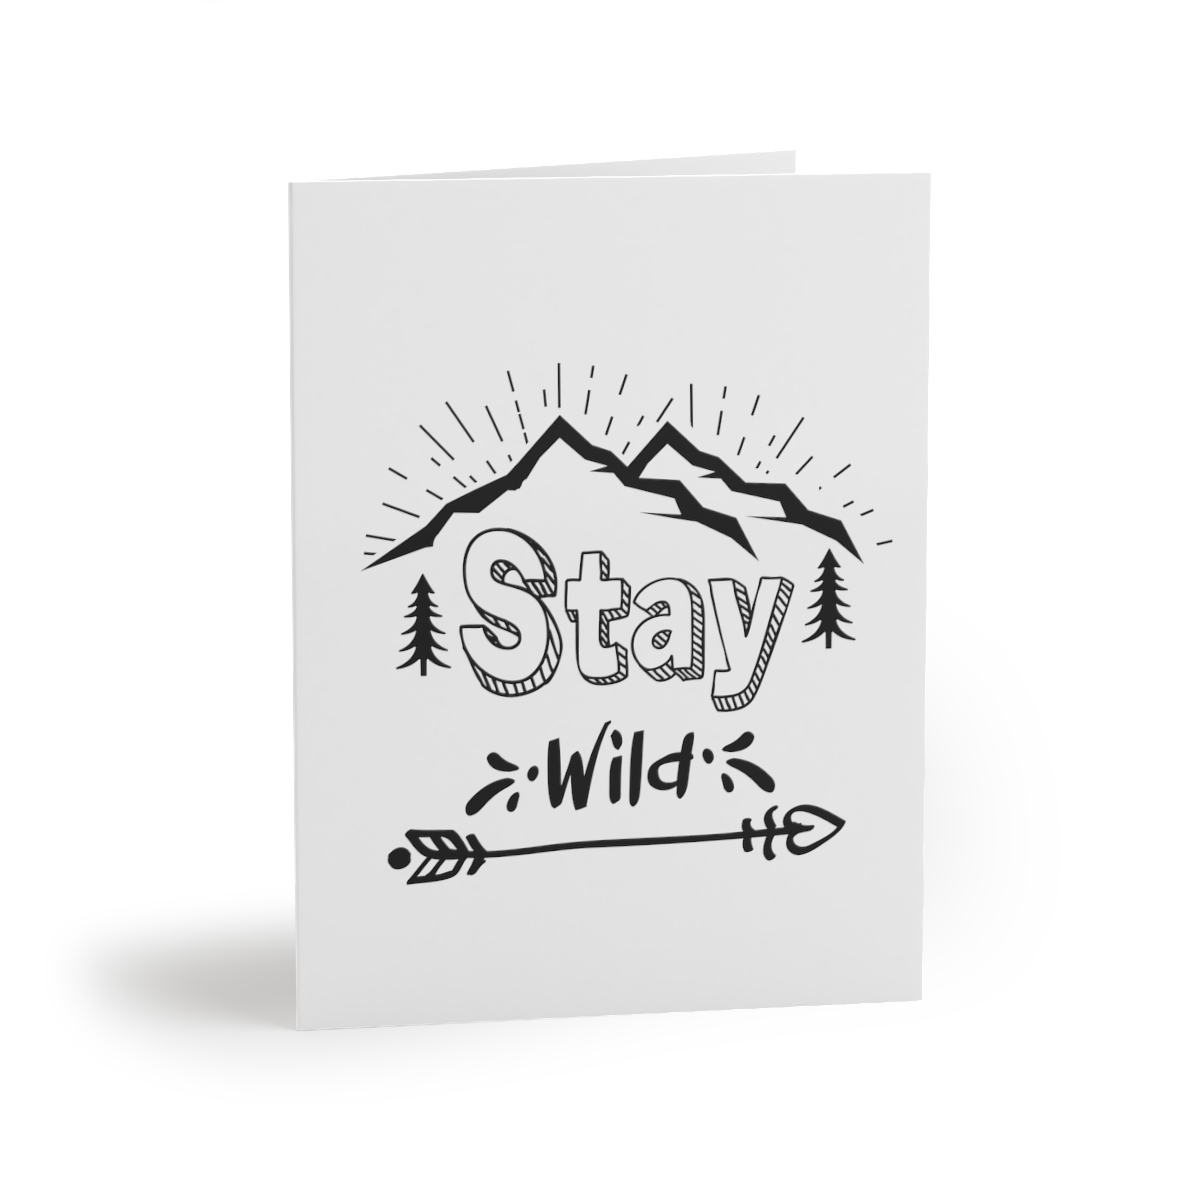 Personalized Greeting Cards (8/16/24 Pcs): Add Unique Touch to Your Wishes - $32.96 - $61.80